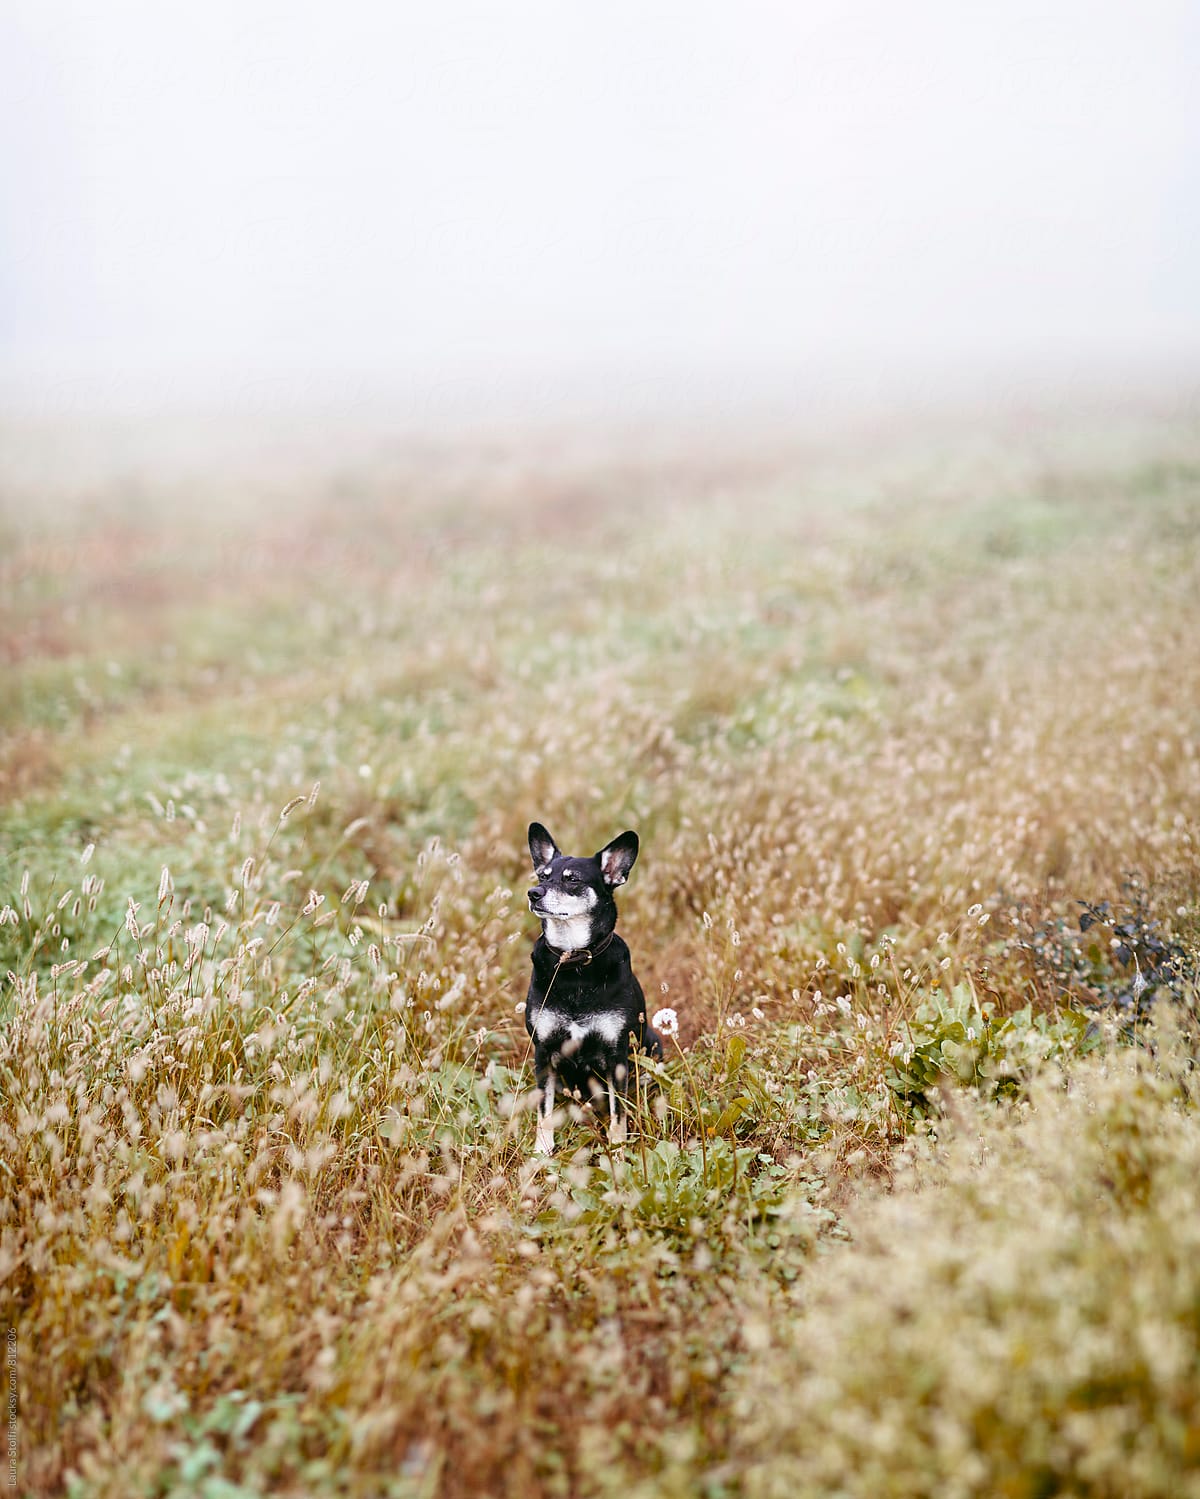 Early one morning while sitting amongst spikes and flowers a dog enjoys the fog in country fields